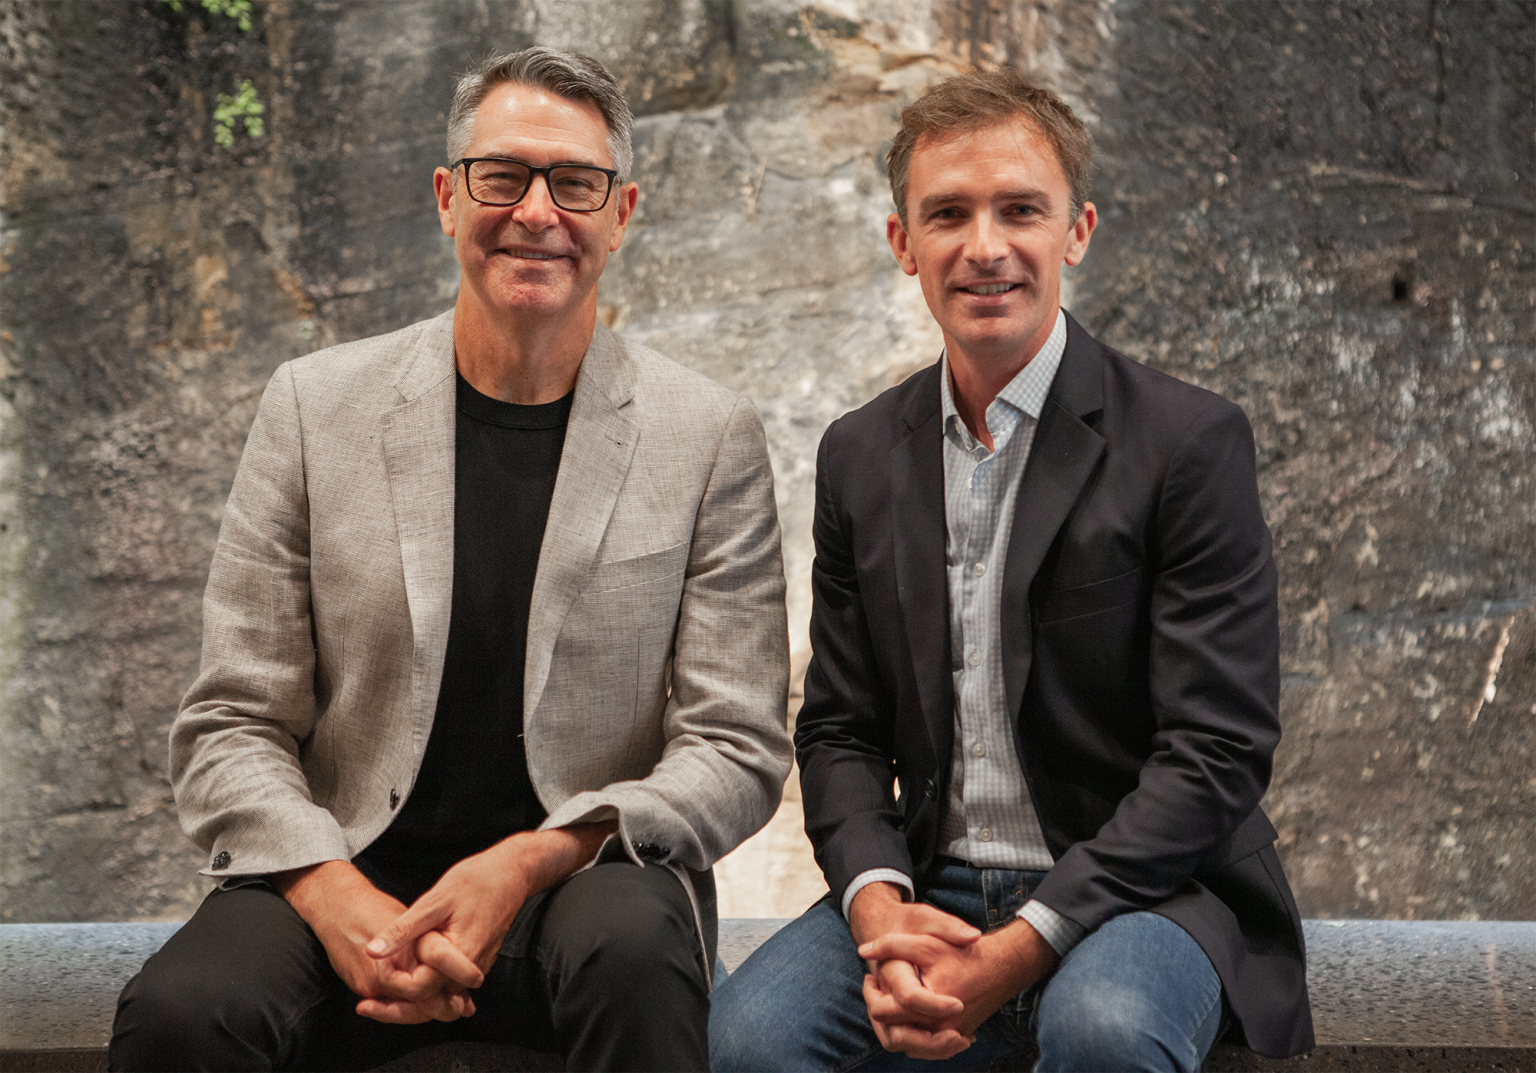 Wunderman Thompson Appoints Gavin Bain as CEO and Matt Parry as Head of WPP Team Helix for HSBC in APAC